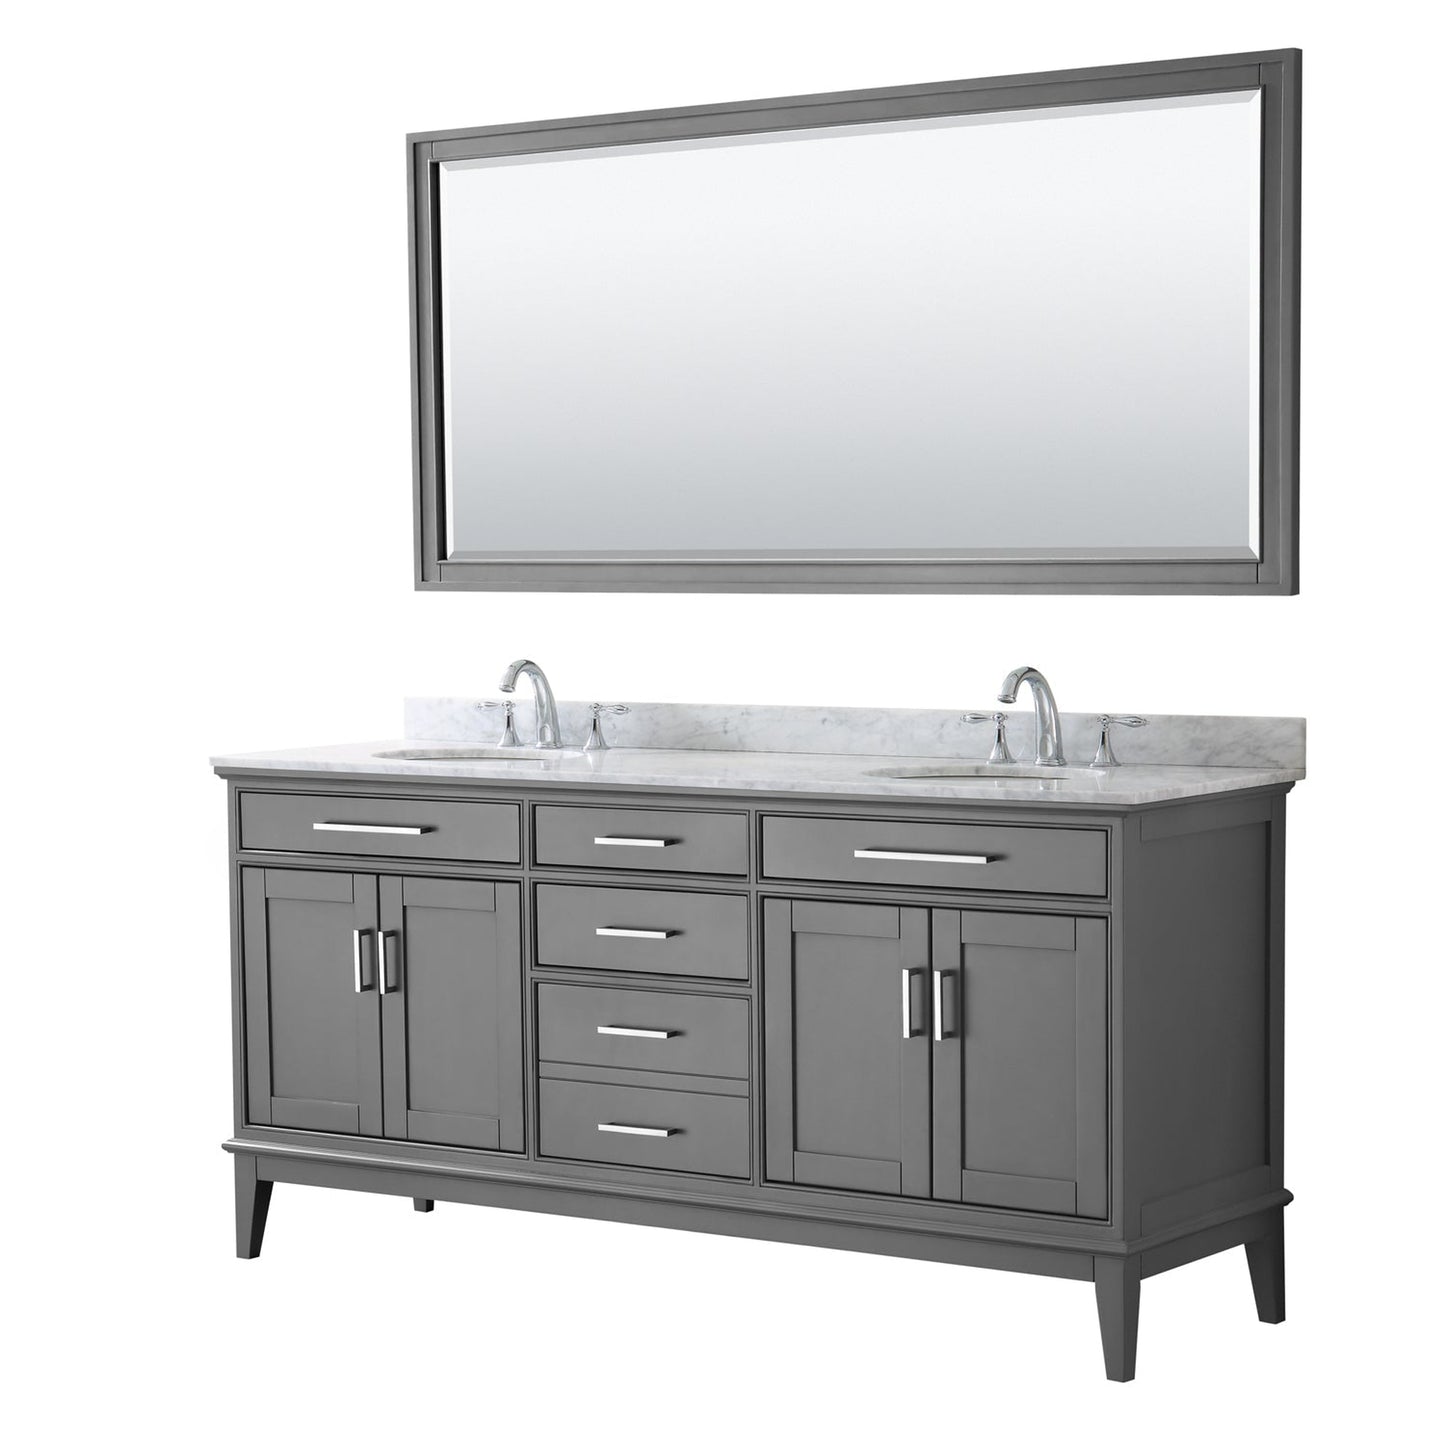 Wyndham Collection Margate 72" Double Bathroom Dark Gray Vanity With White Carrara Marble Countertop, Undermount Oval Sink And 70" Mirror